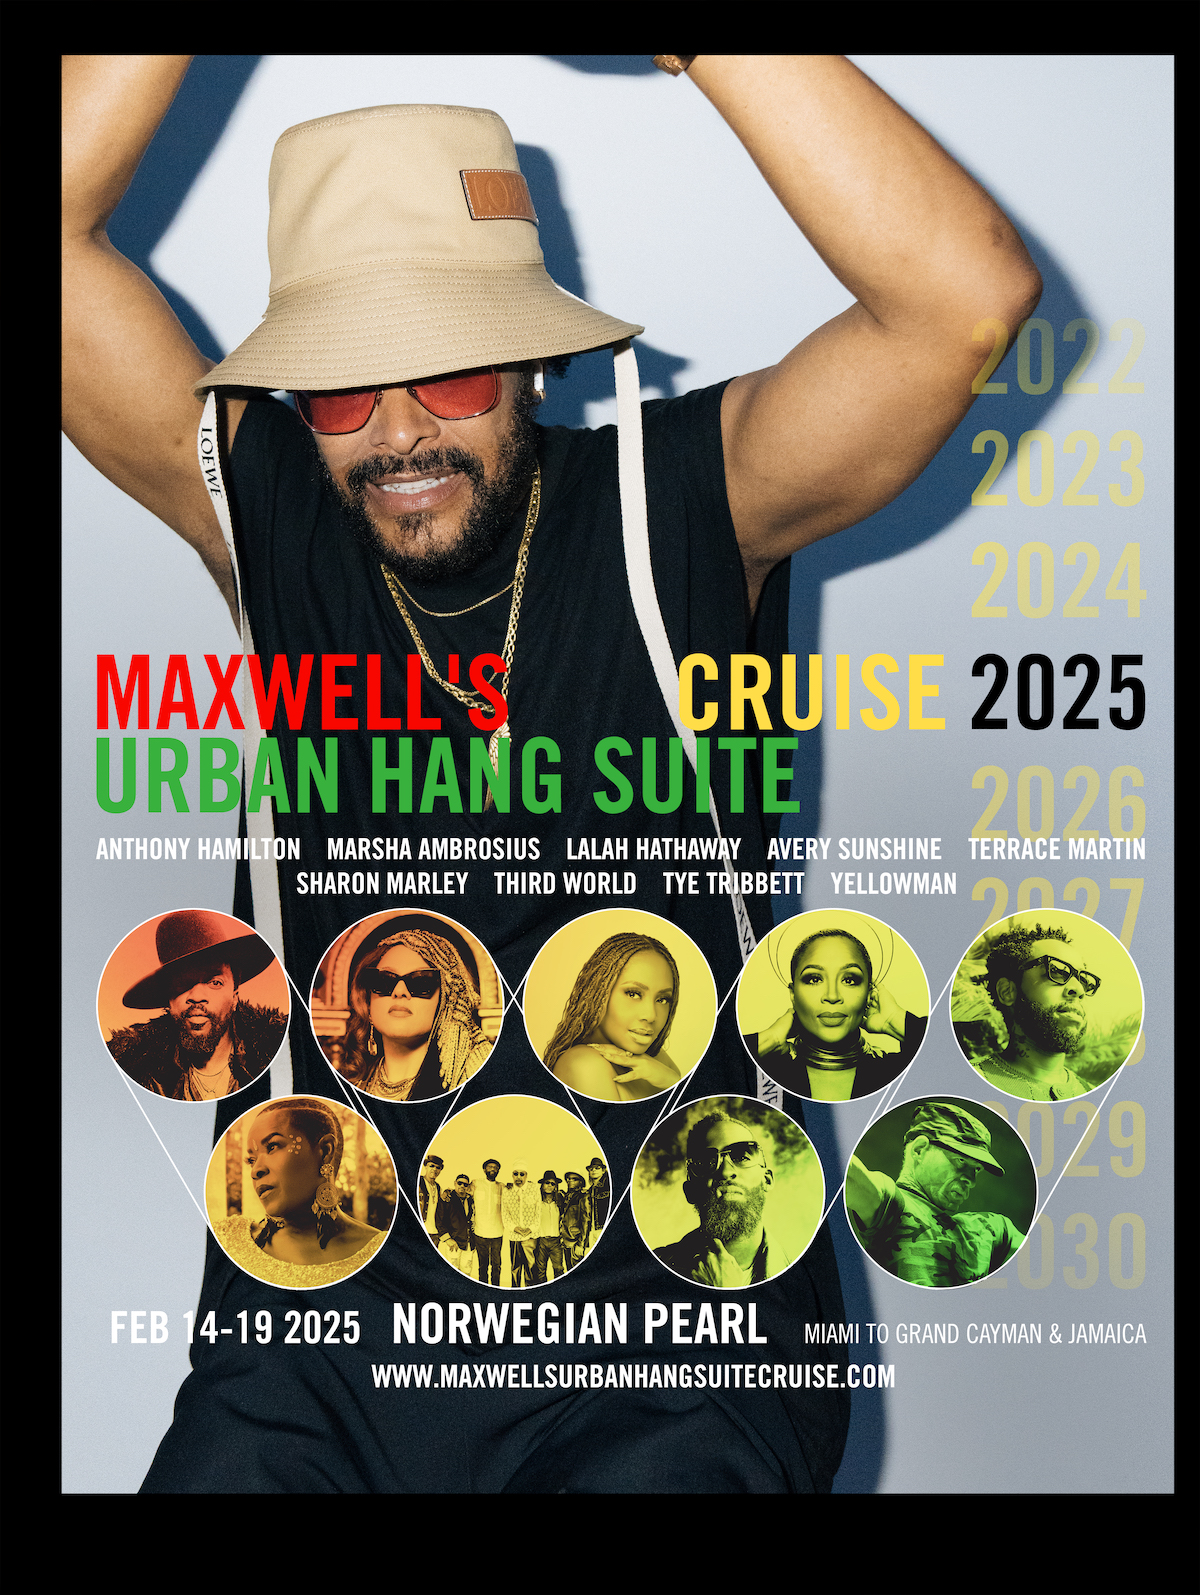 Maxwell’s Urban Hang Suite Cruise